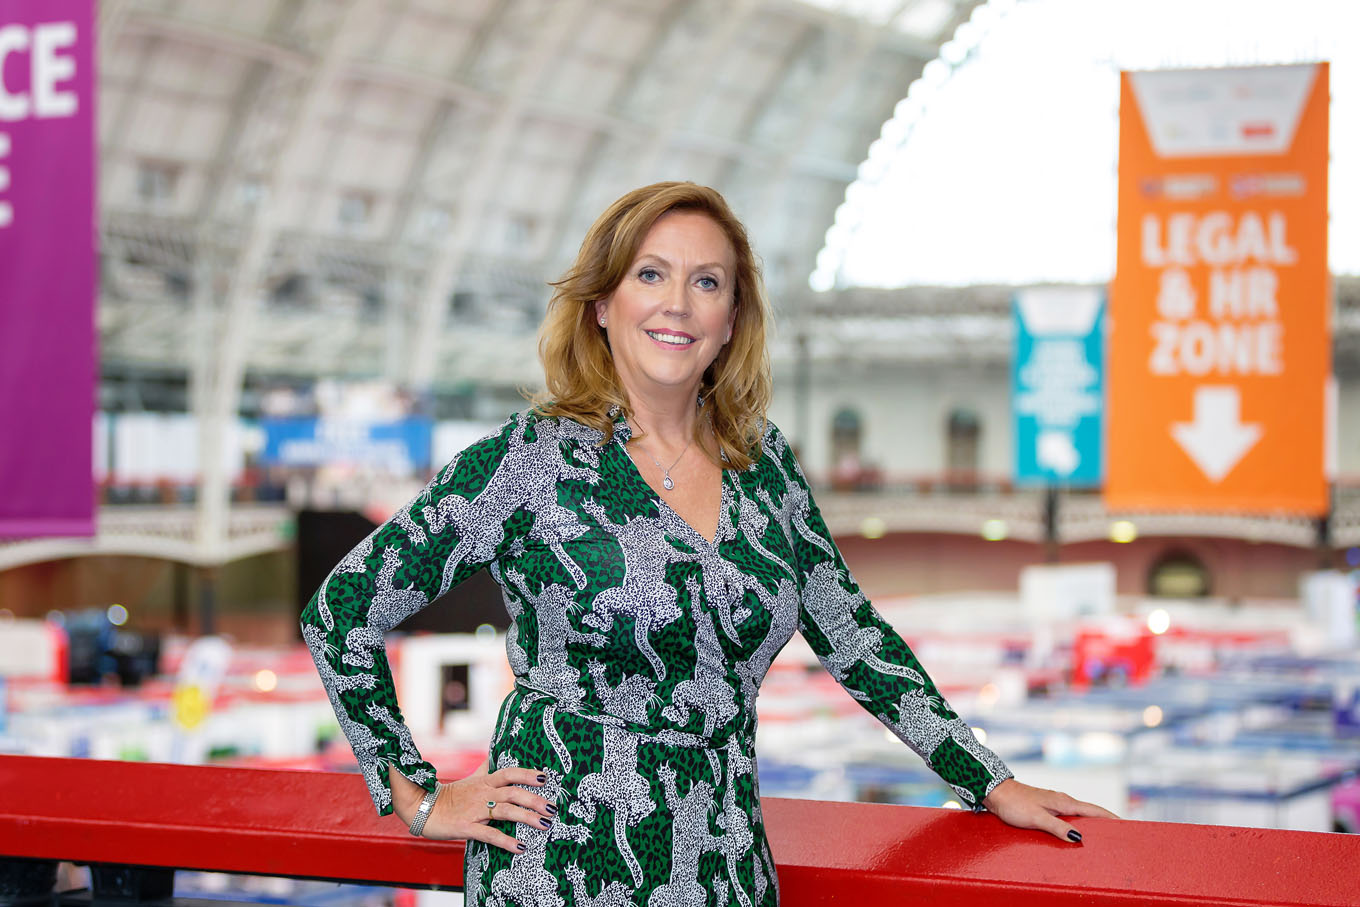 A portrait of Jenny Campbell taken at the Business Show